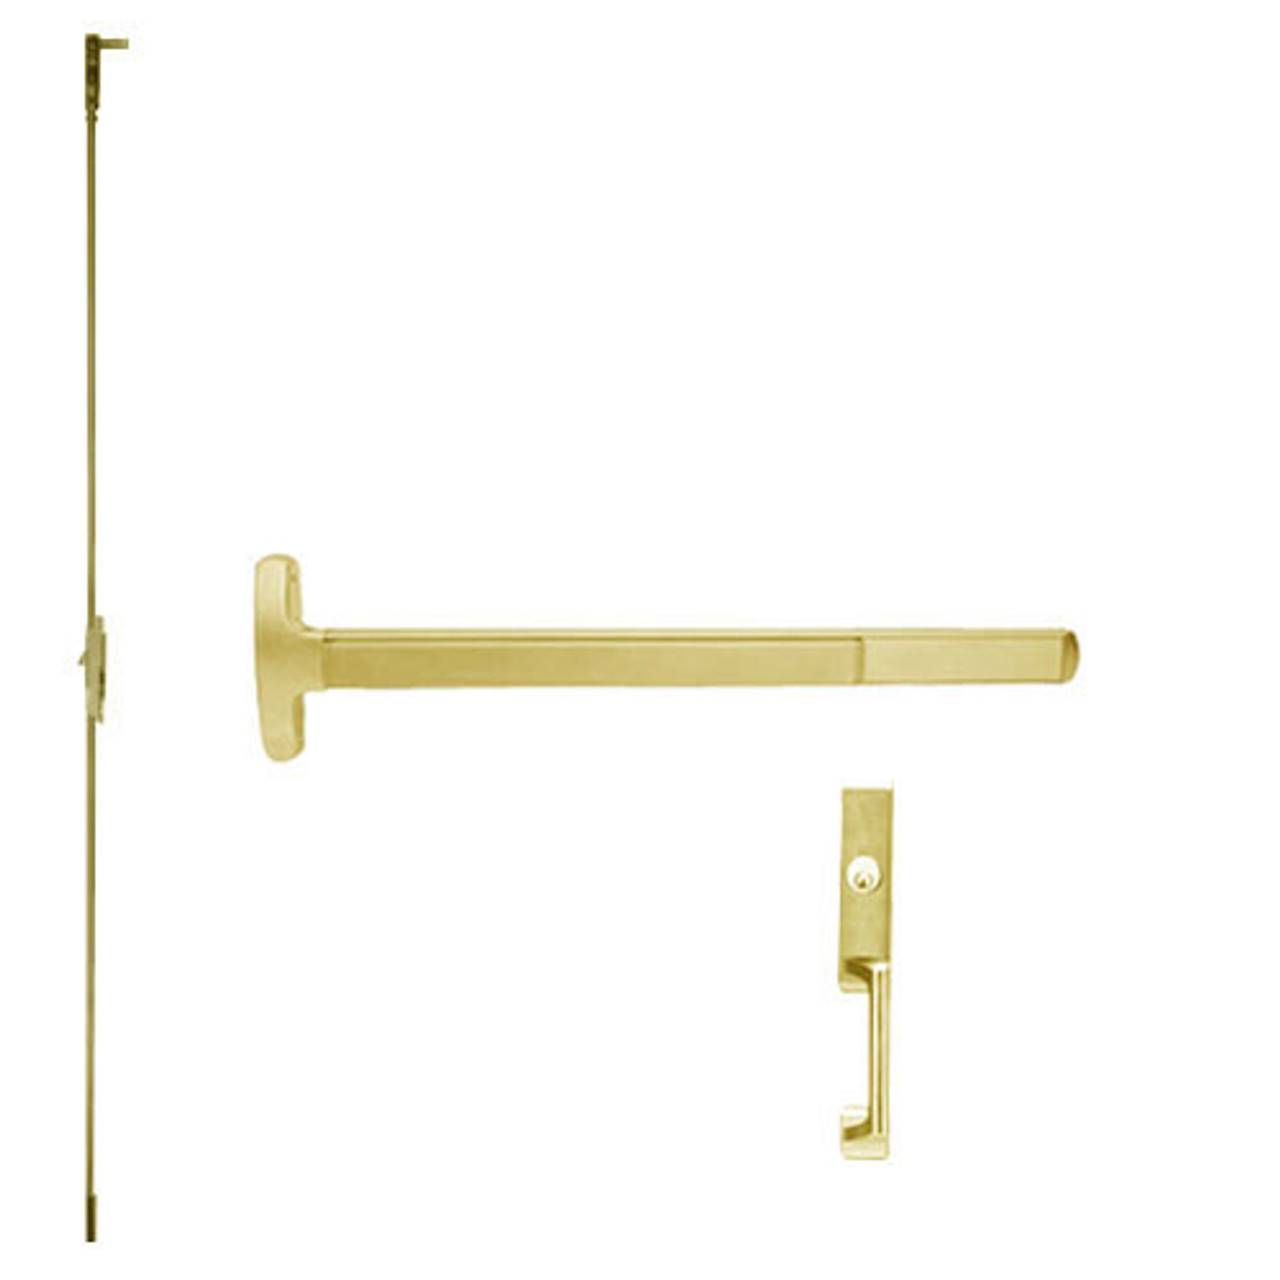 F-24-C-NL-US3-2-LHR Falcon Exit Device in Polished Brass